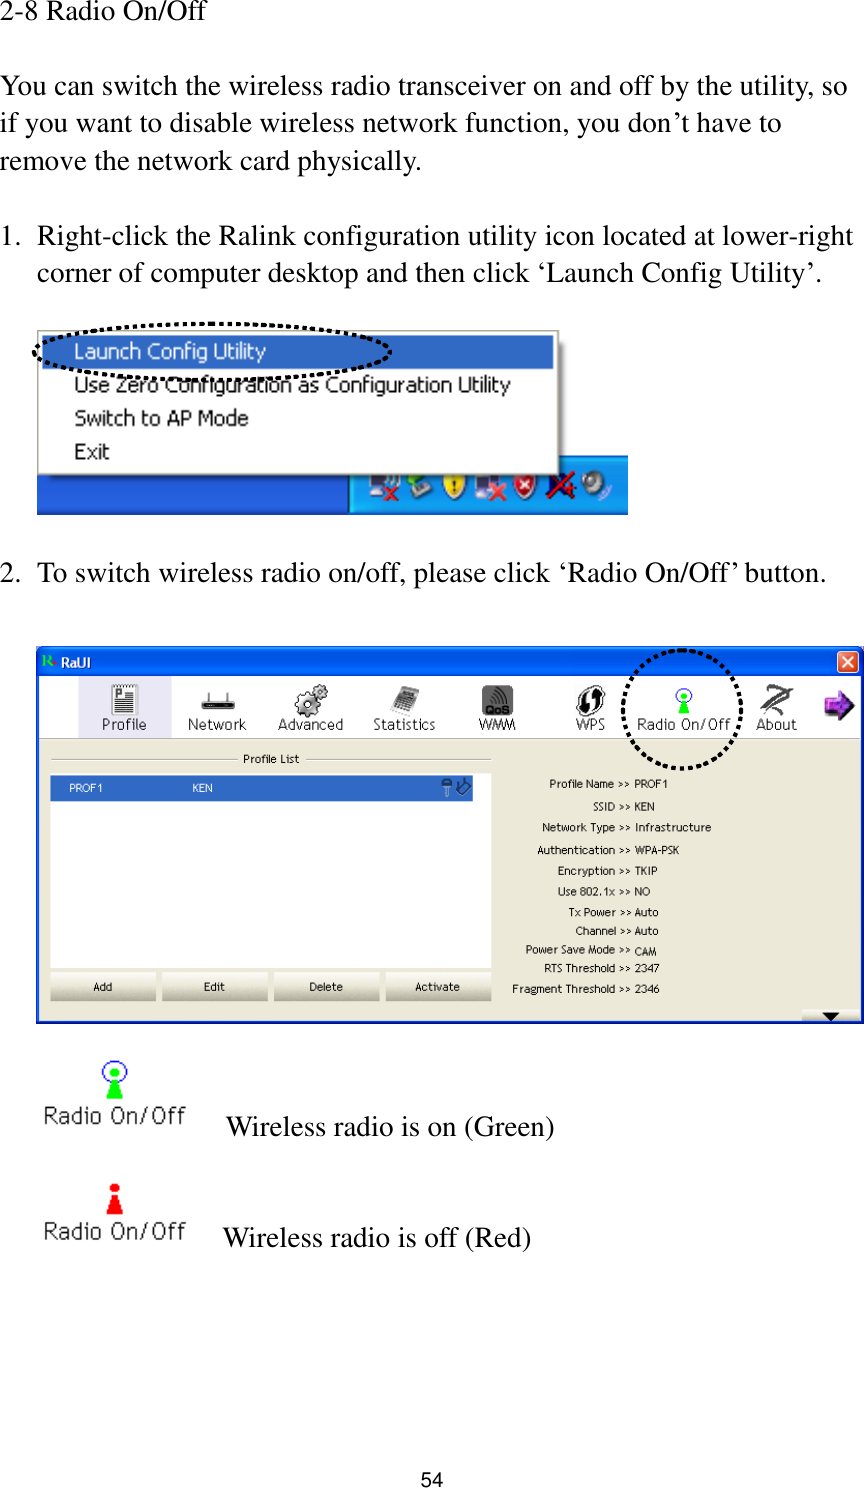  54 2-8 Radio On/Off  You can switch the wireless radio transceiver on and off by the utility, so if you want to disable wireless network function, you don‟t have to remove the network card physically.  1. Right-click the Ralink configuration utility icon located at lower-right corner of computer desktop and then click „Launch Config Utility‟.    2. To switch wireless radio on/off, please click „Radio On/Off‟ button.     Wireless radio is on (Green)   Wireless radio is off (Red) 